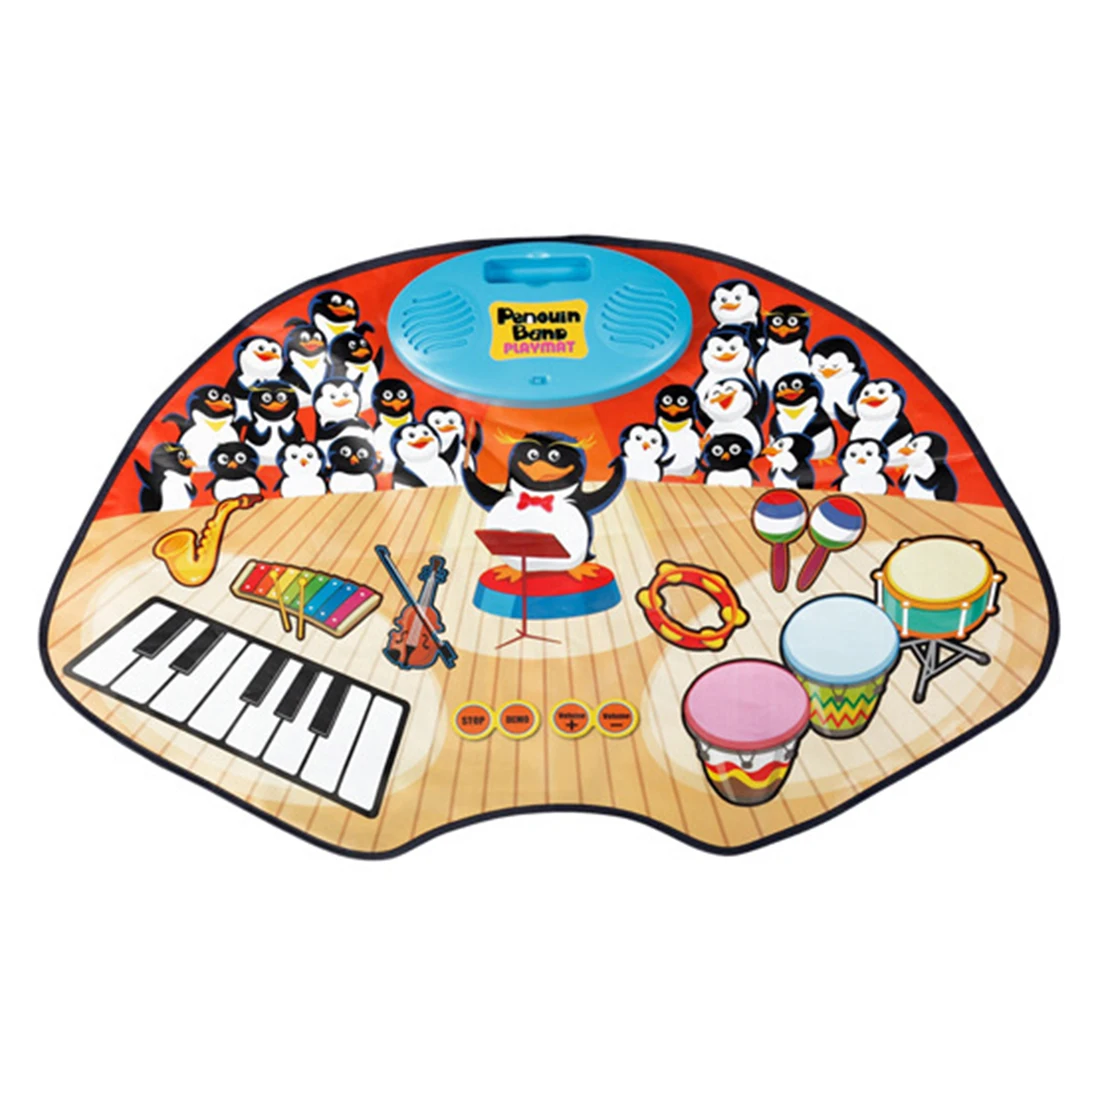 

Penguin Band Playmat Music Play Mat Rock 'N' Roll Electronic Drum Piano Toy Musical Sound Play Mat Instrument Kids Interaction